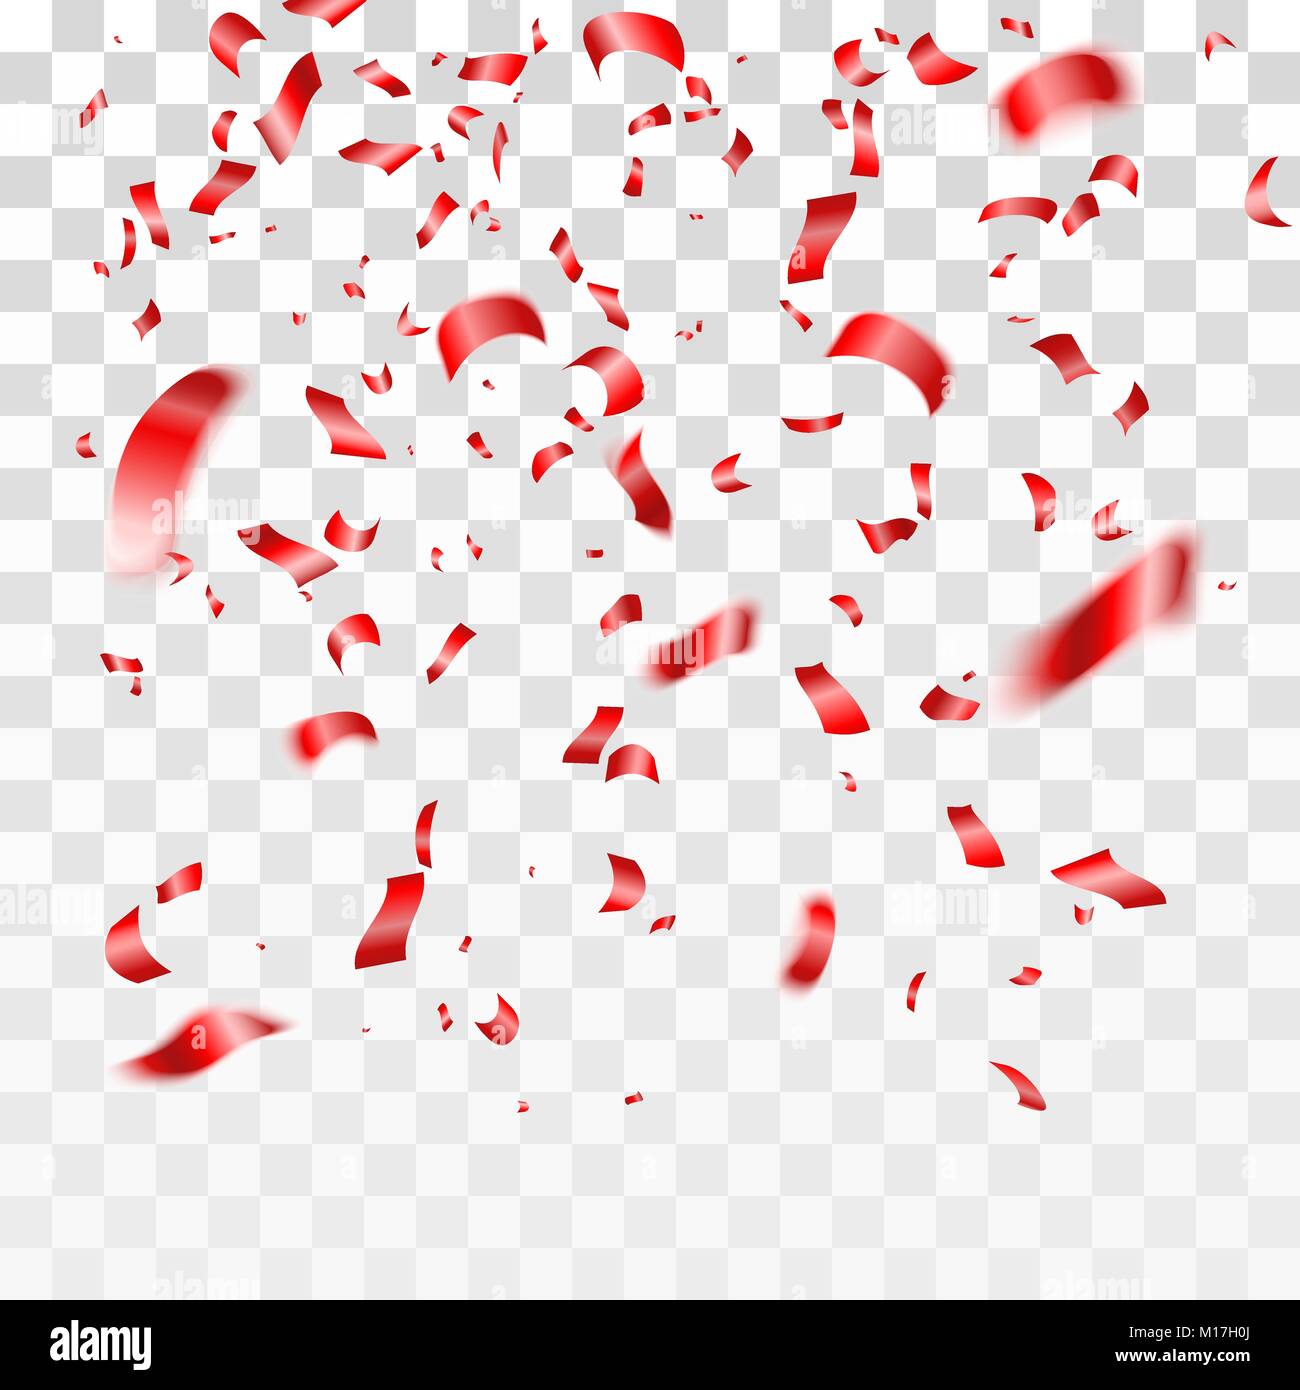 Red confetti on transparent background. Celebration of happy events. Birthday party background. Vector illustration Stock Vector